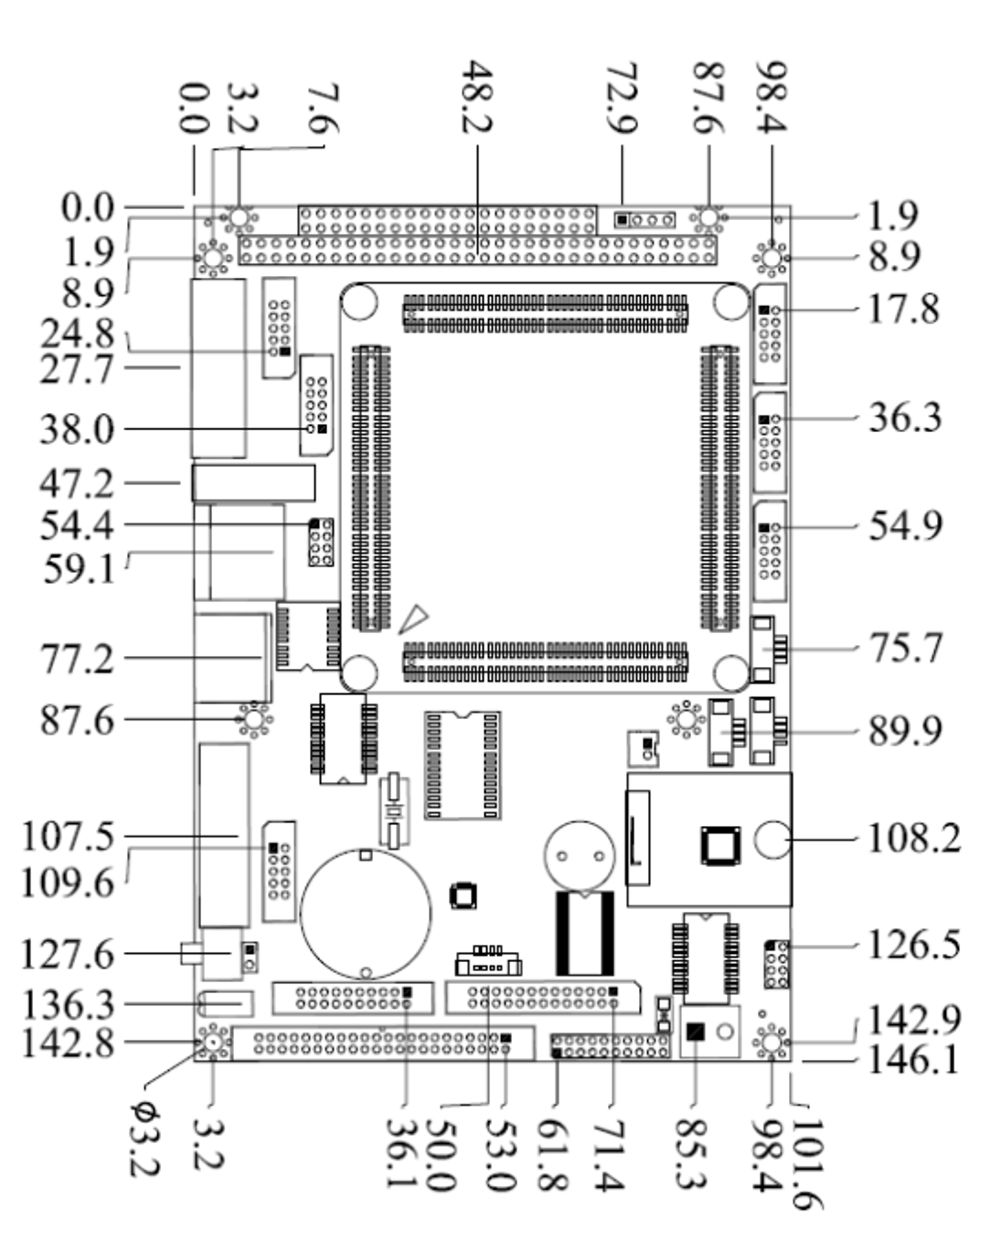 Embedded Board VDX3-6726-2G Top